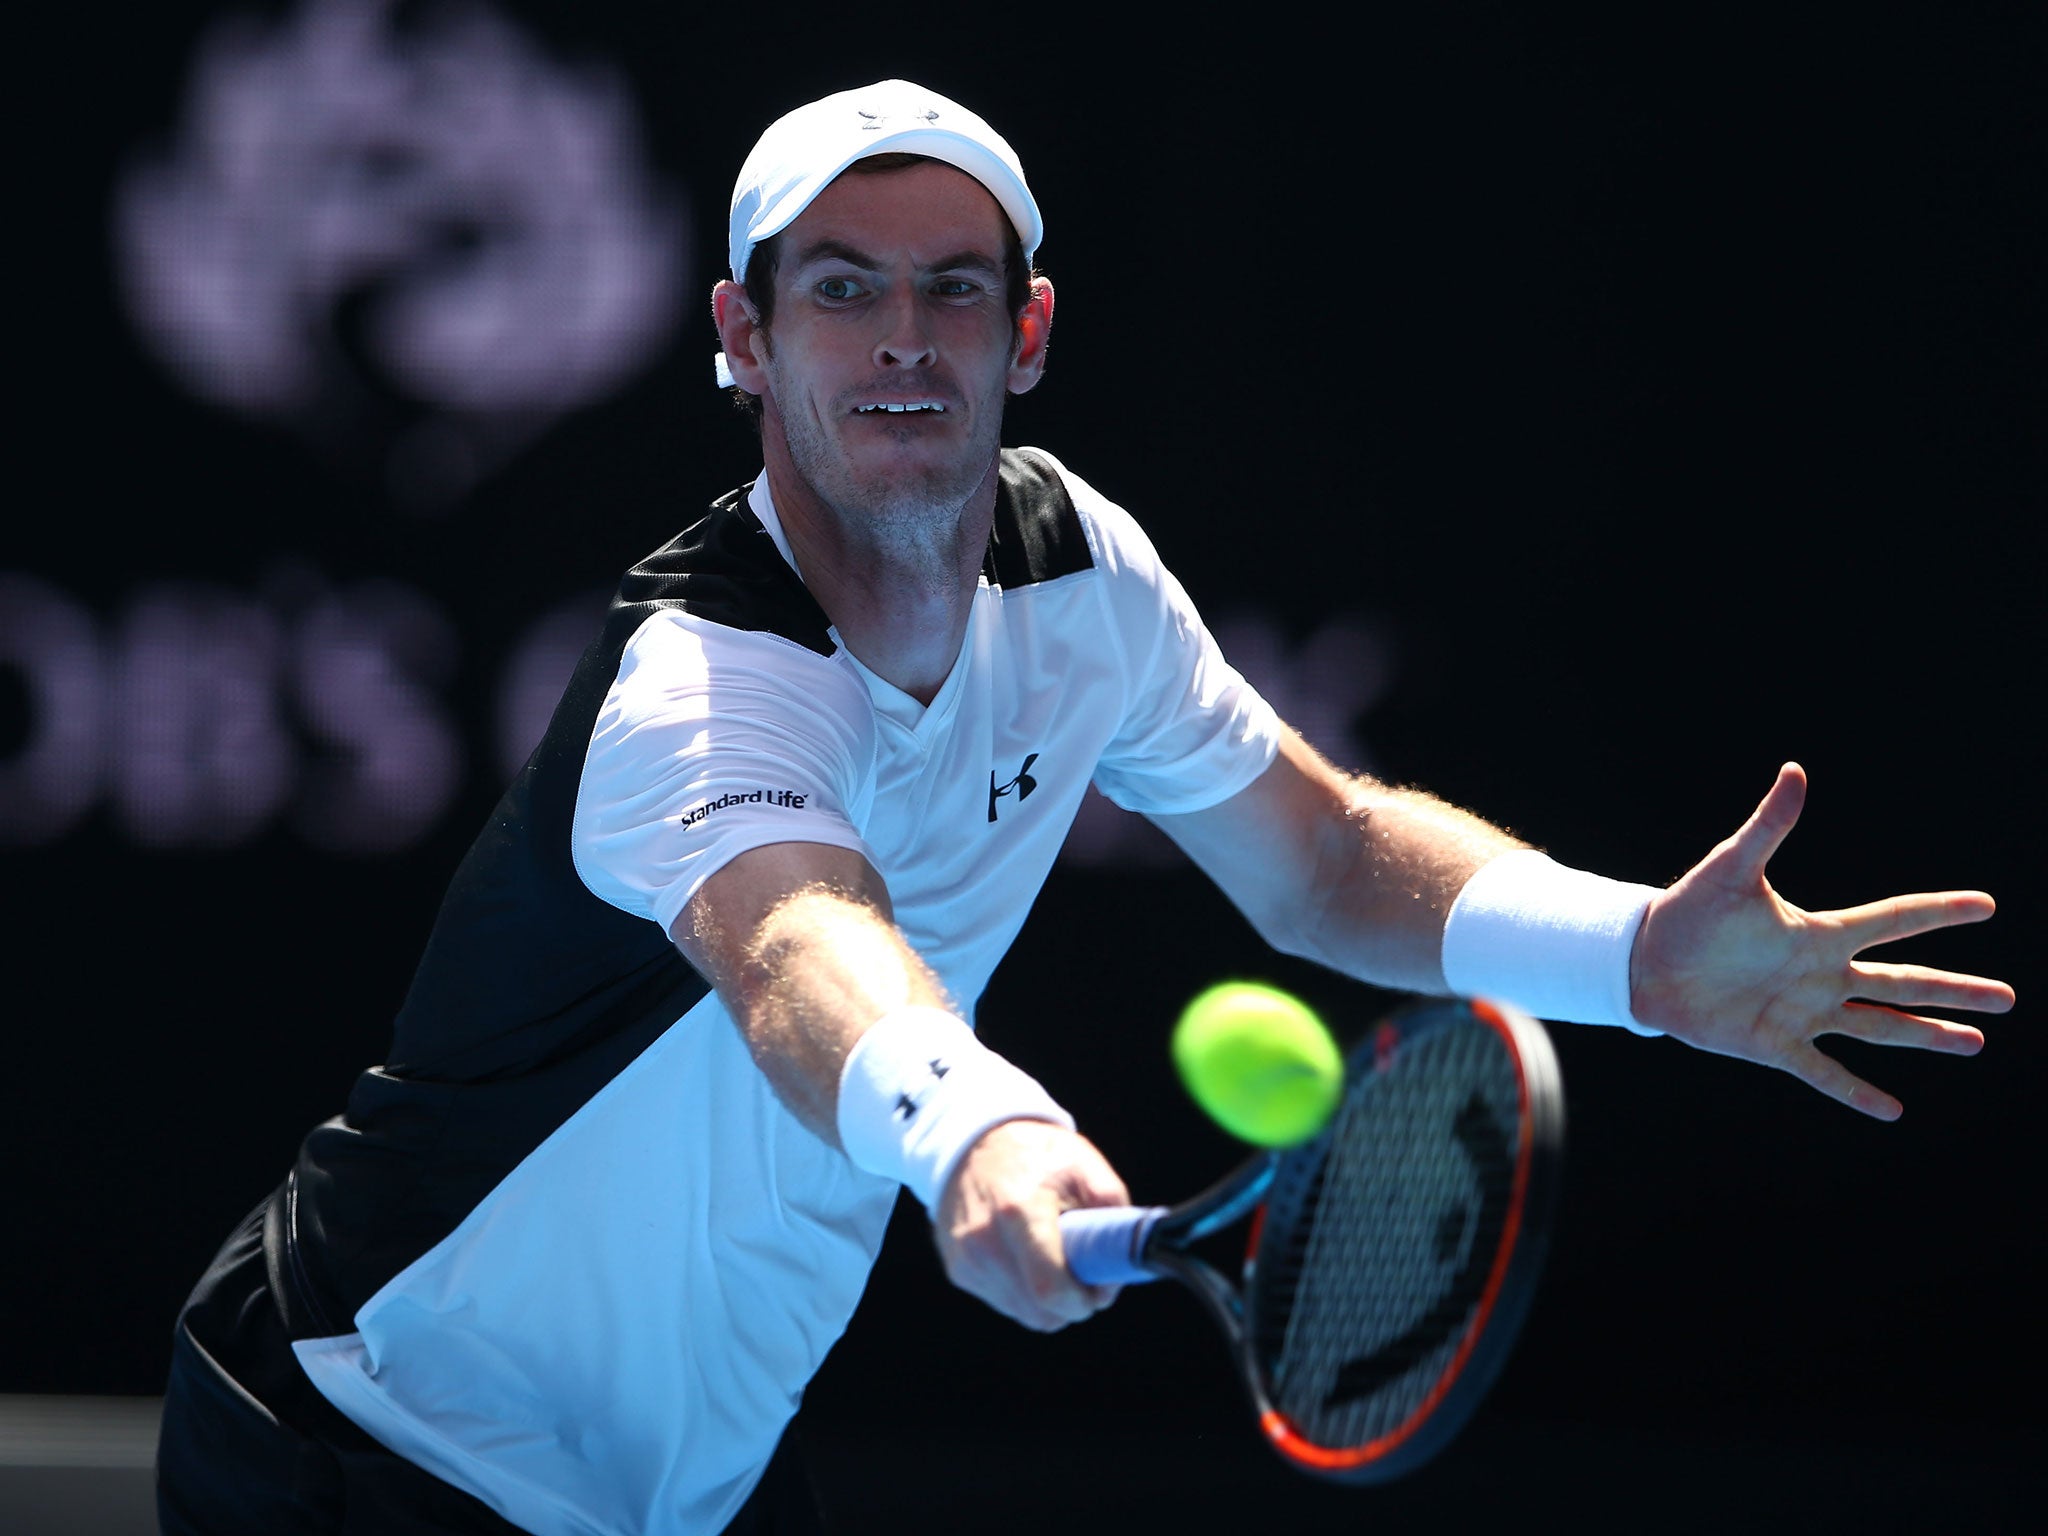 Andy Murray recorded a comfortable 6-1, 6-2, 6-3 victory over Alexander Zverev